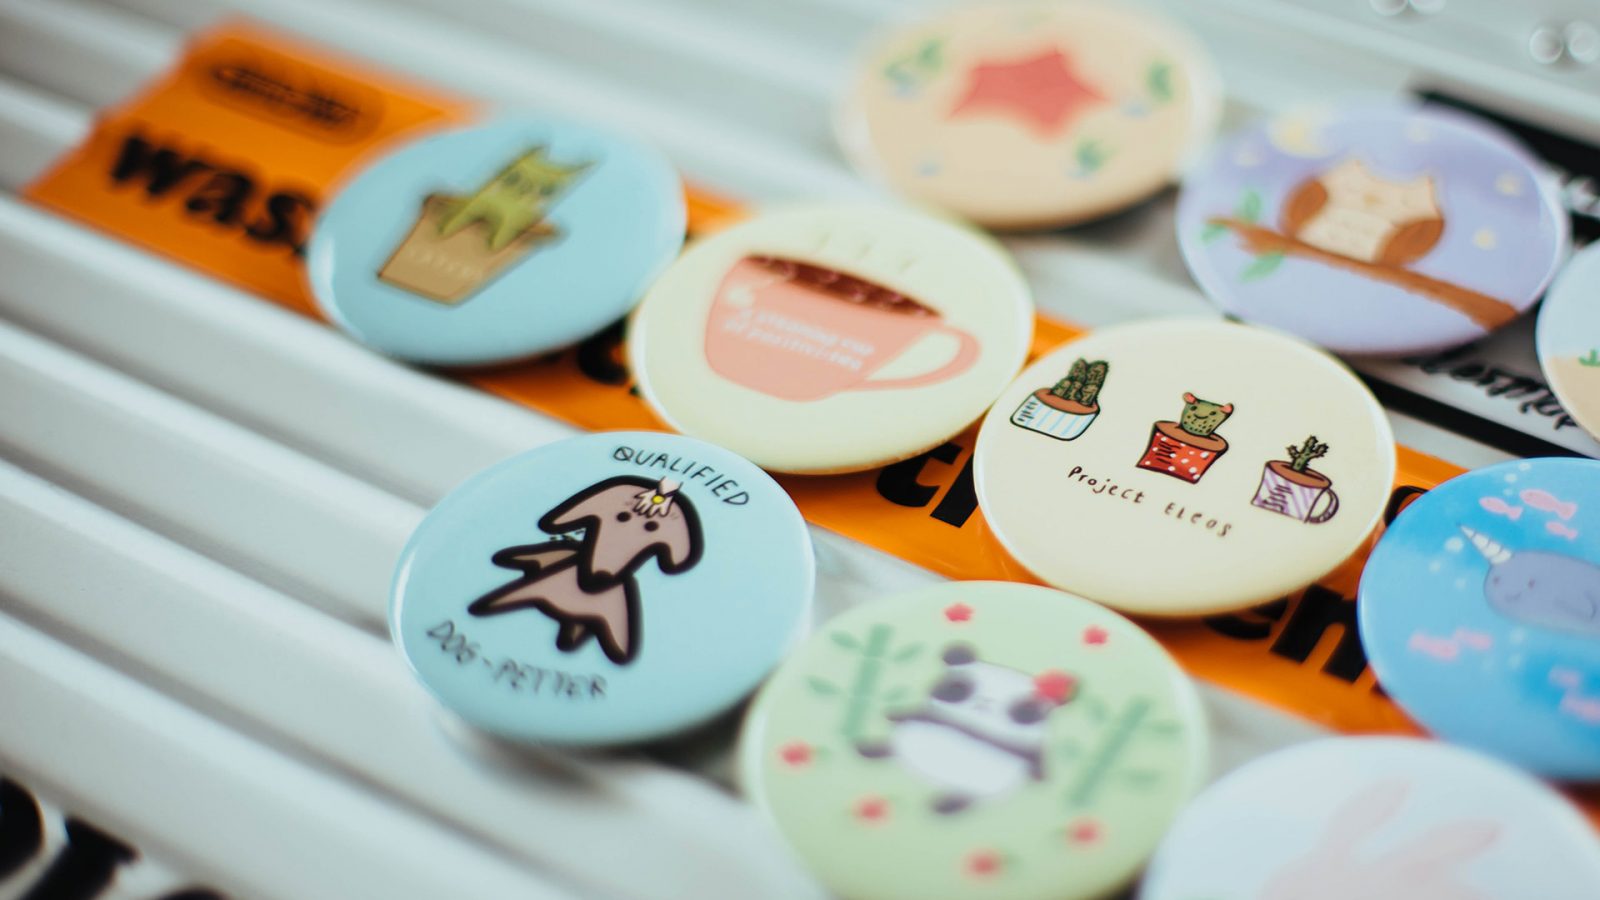 badges with illustrated graphics on them